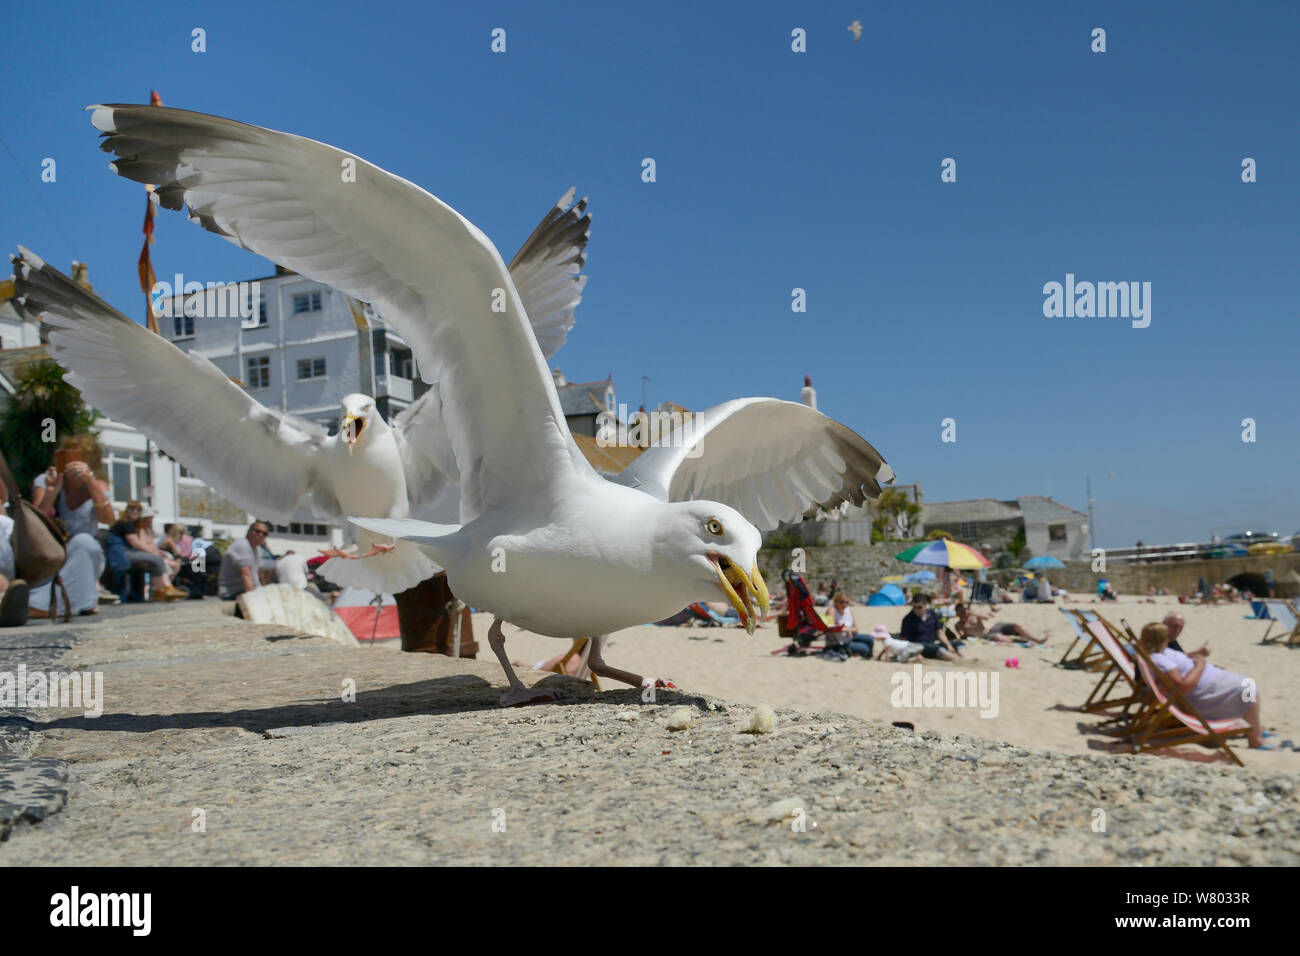 Adult Herring gulls (Larus argentatus) scavenging food left on beach, St.Ives, Cornwall, UK, June. Editorial use only. Stock Photo